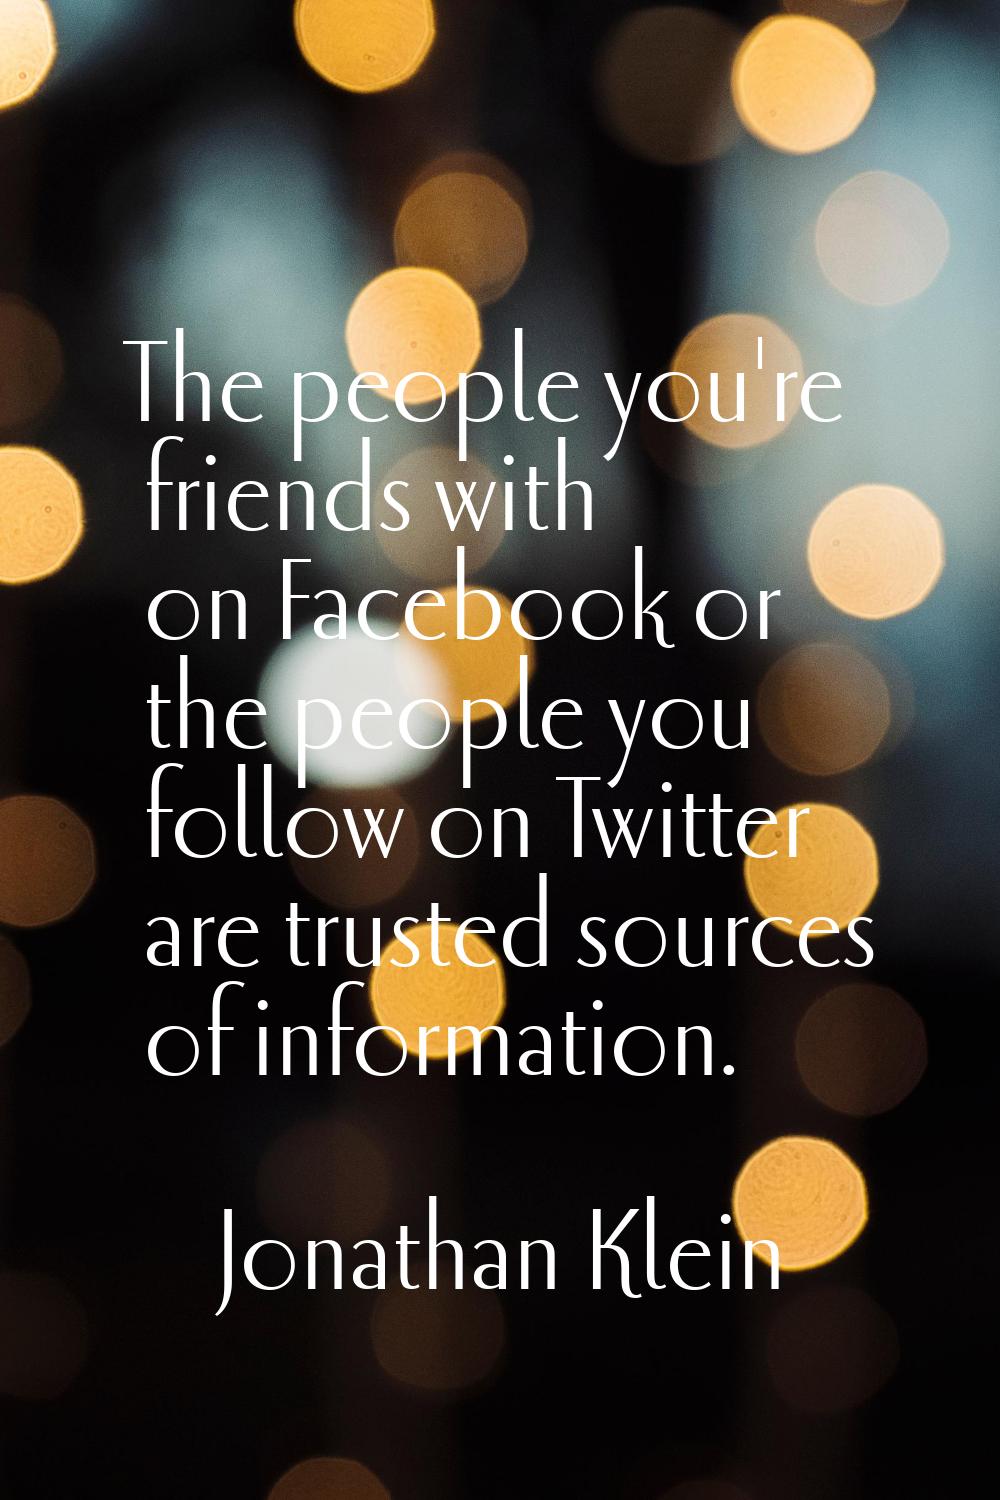 The people you're friends with on Facebook or the people you follow on Twitter are trusted sources 